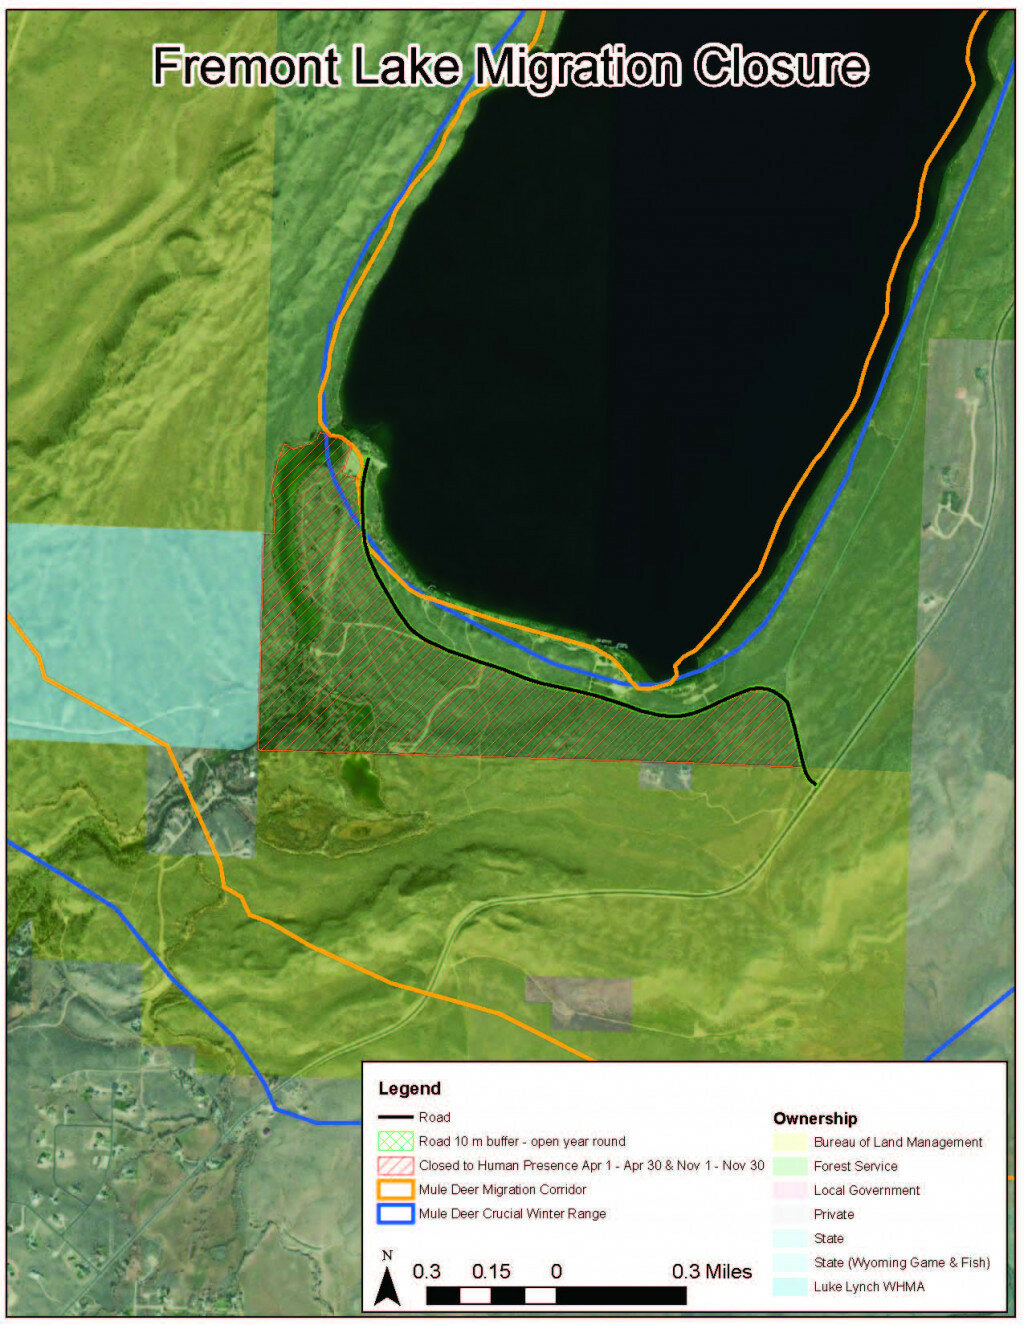 Pinedale Ranger District courtesy image 
This map depicts the seasonal recreational closure near the outlet of Fremont Lake as proposed by the Pinedale Ranger District of the Bridger-Teton National Forest in collaboration with the Wyoming Game and Fish Department.